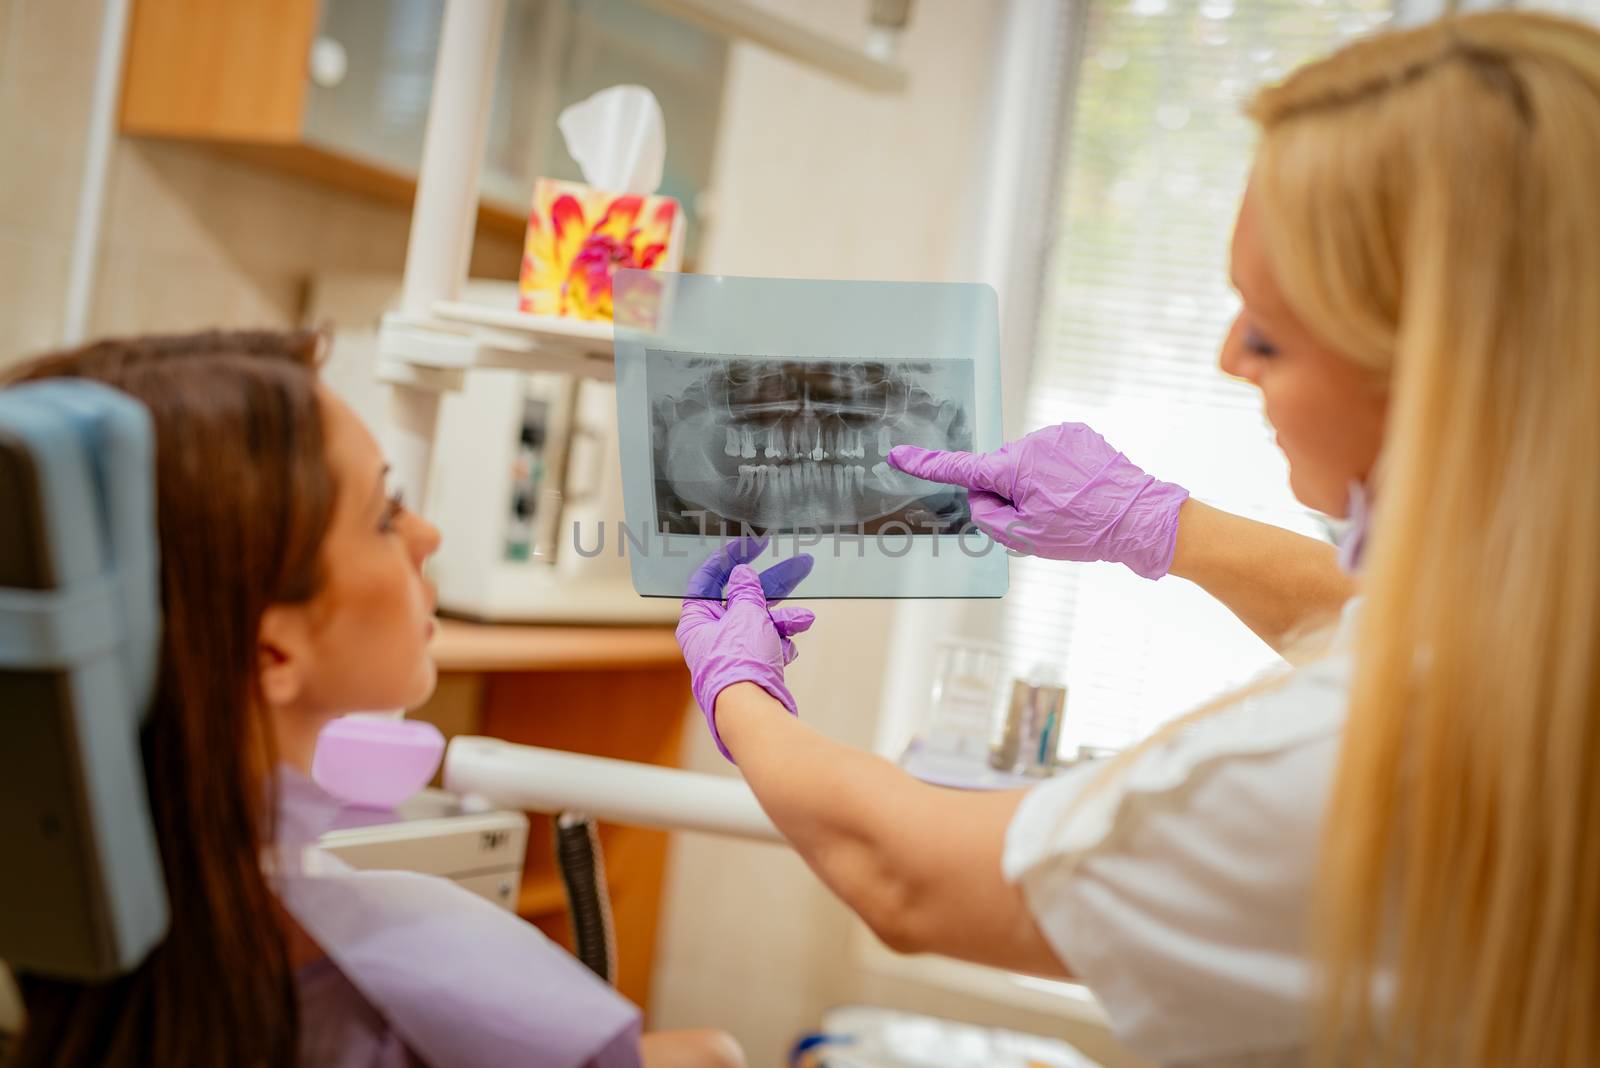 Young female dentist showing to the patient X-ray picture in she`s office. Selective focus.